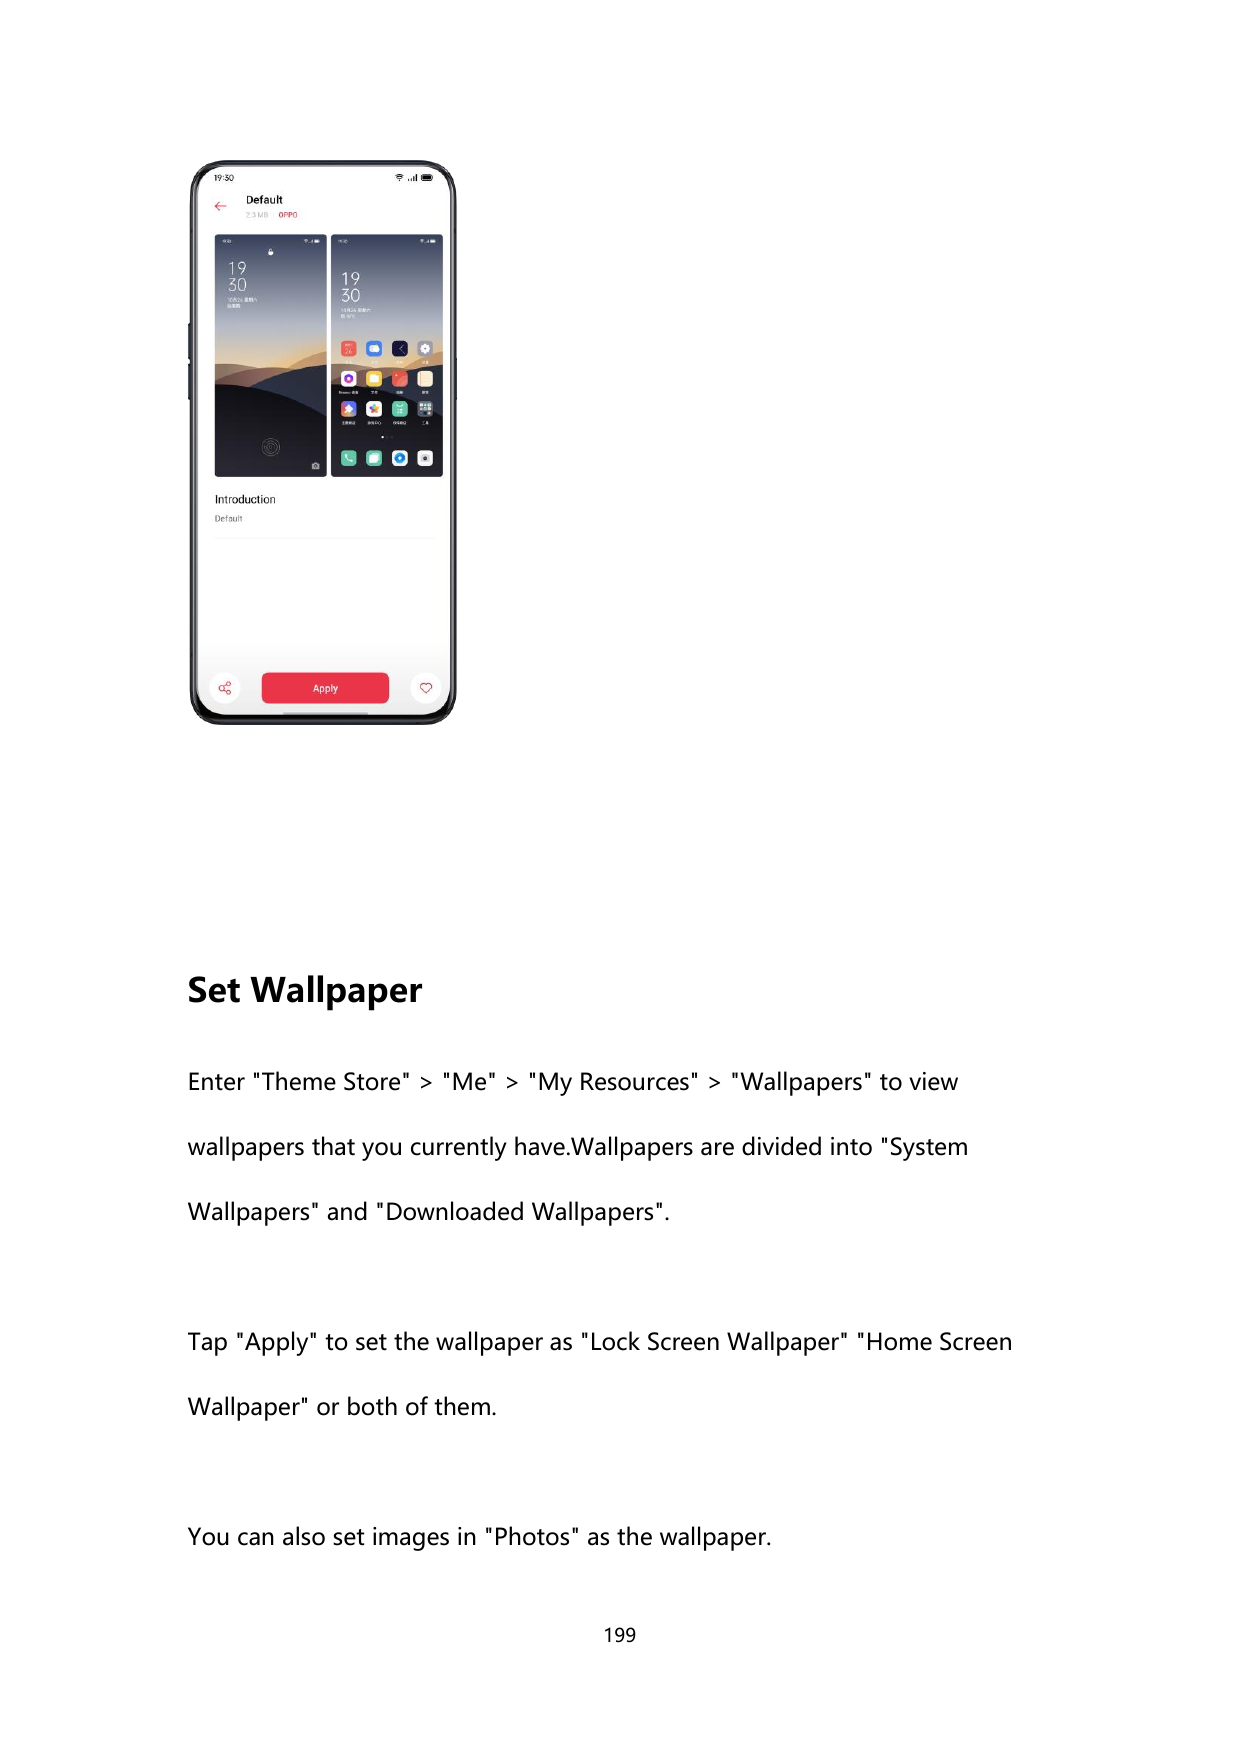 Set WallpaperEnter "Theme Store" > "Me" > "My Resources" > "Wallpapers" to viewwallpapers that you currently have.Wallpapers are